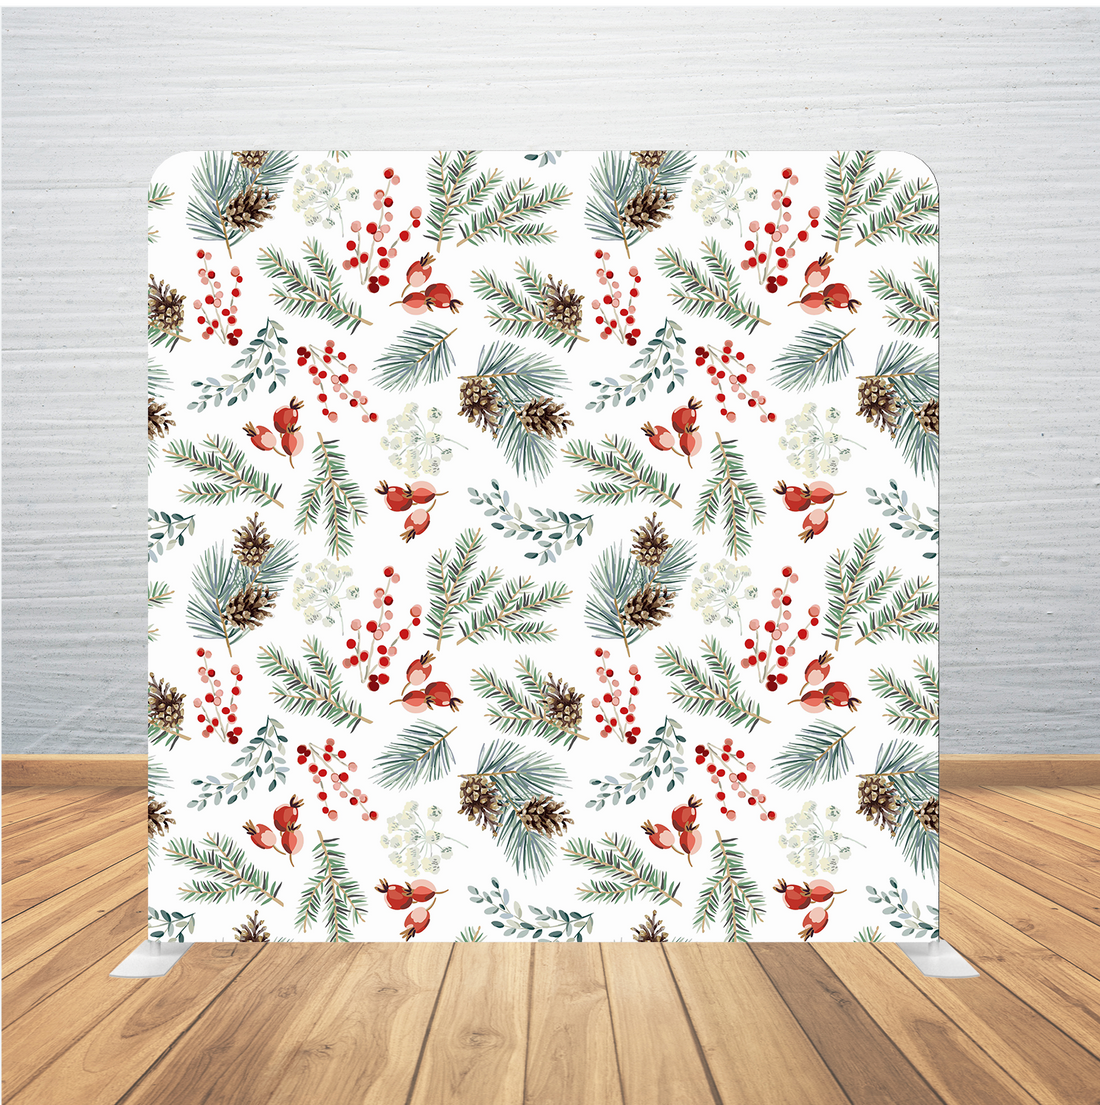 8X8 Pillowcase Tension Backdrop- Holiday Leaves